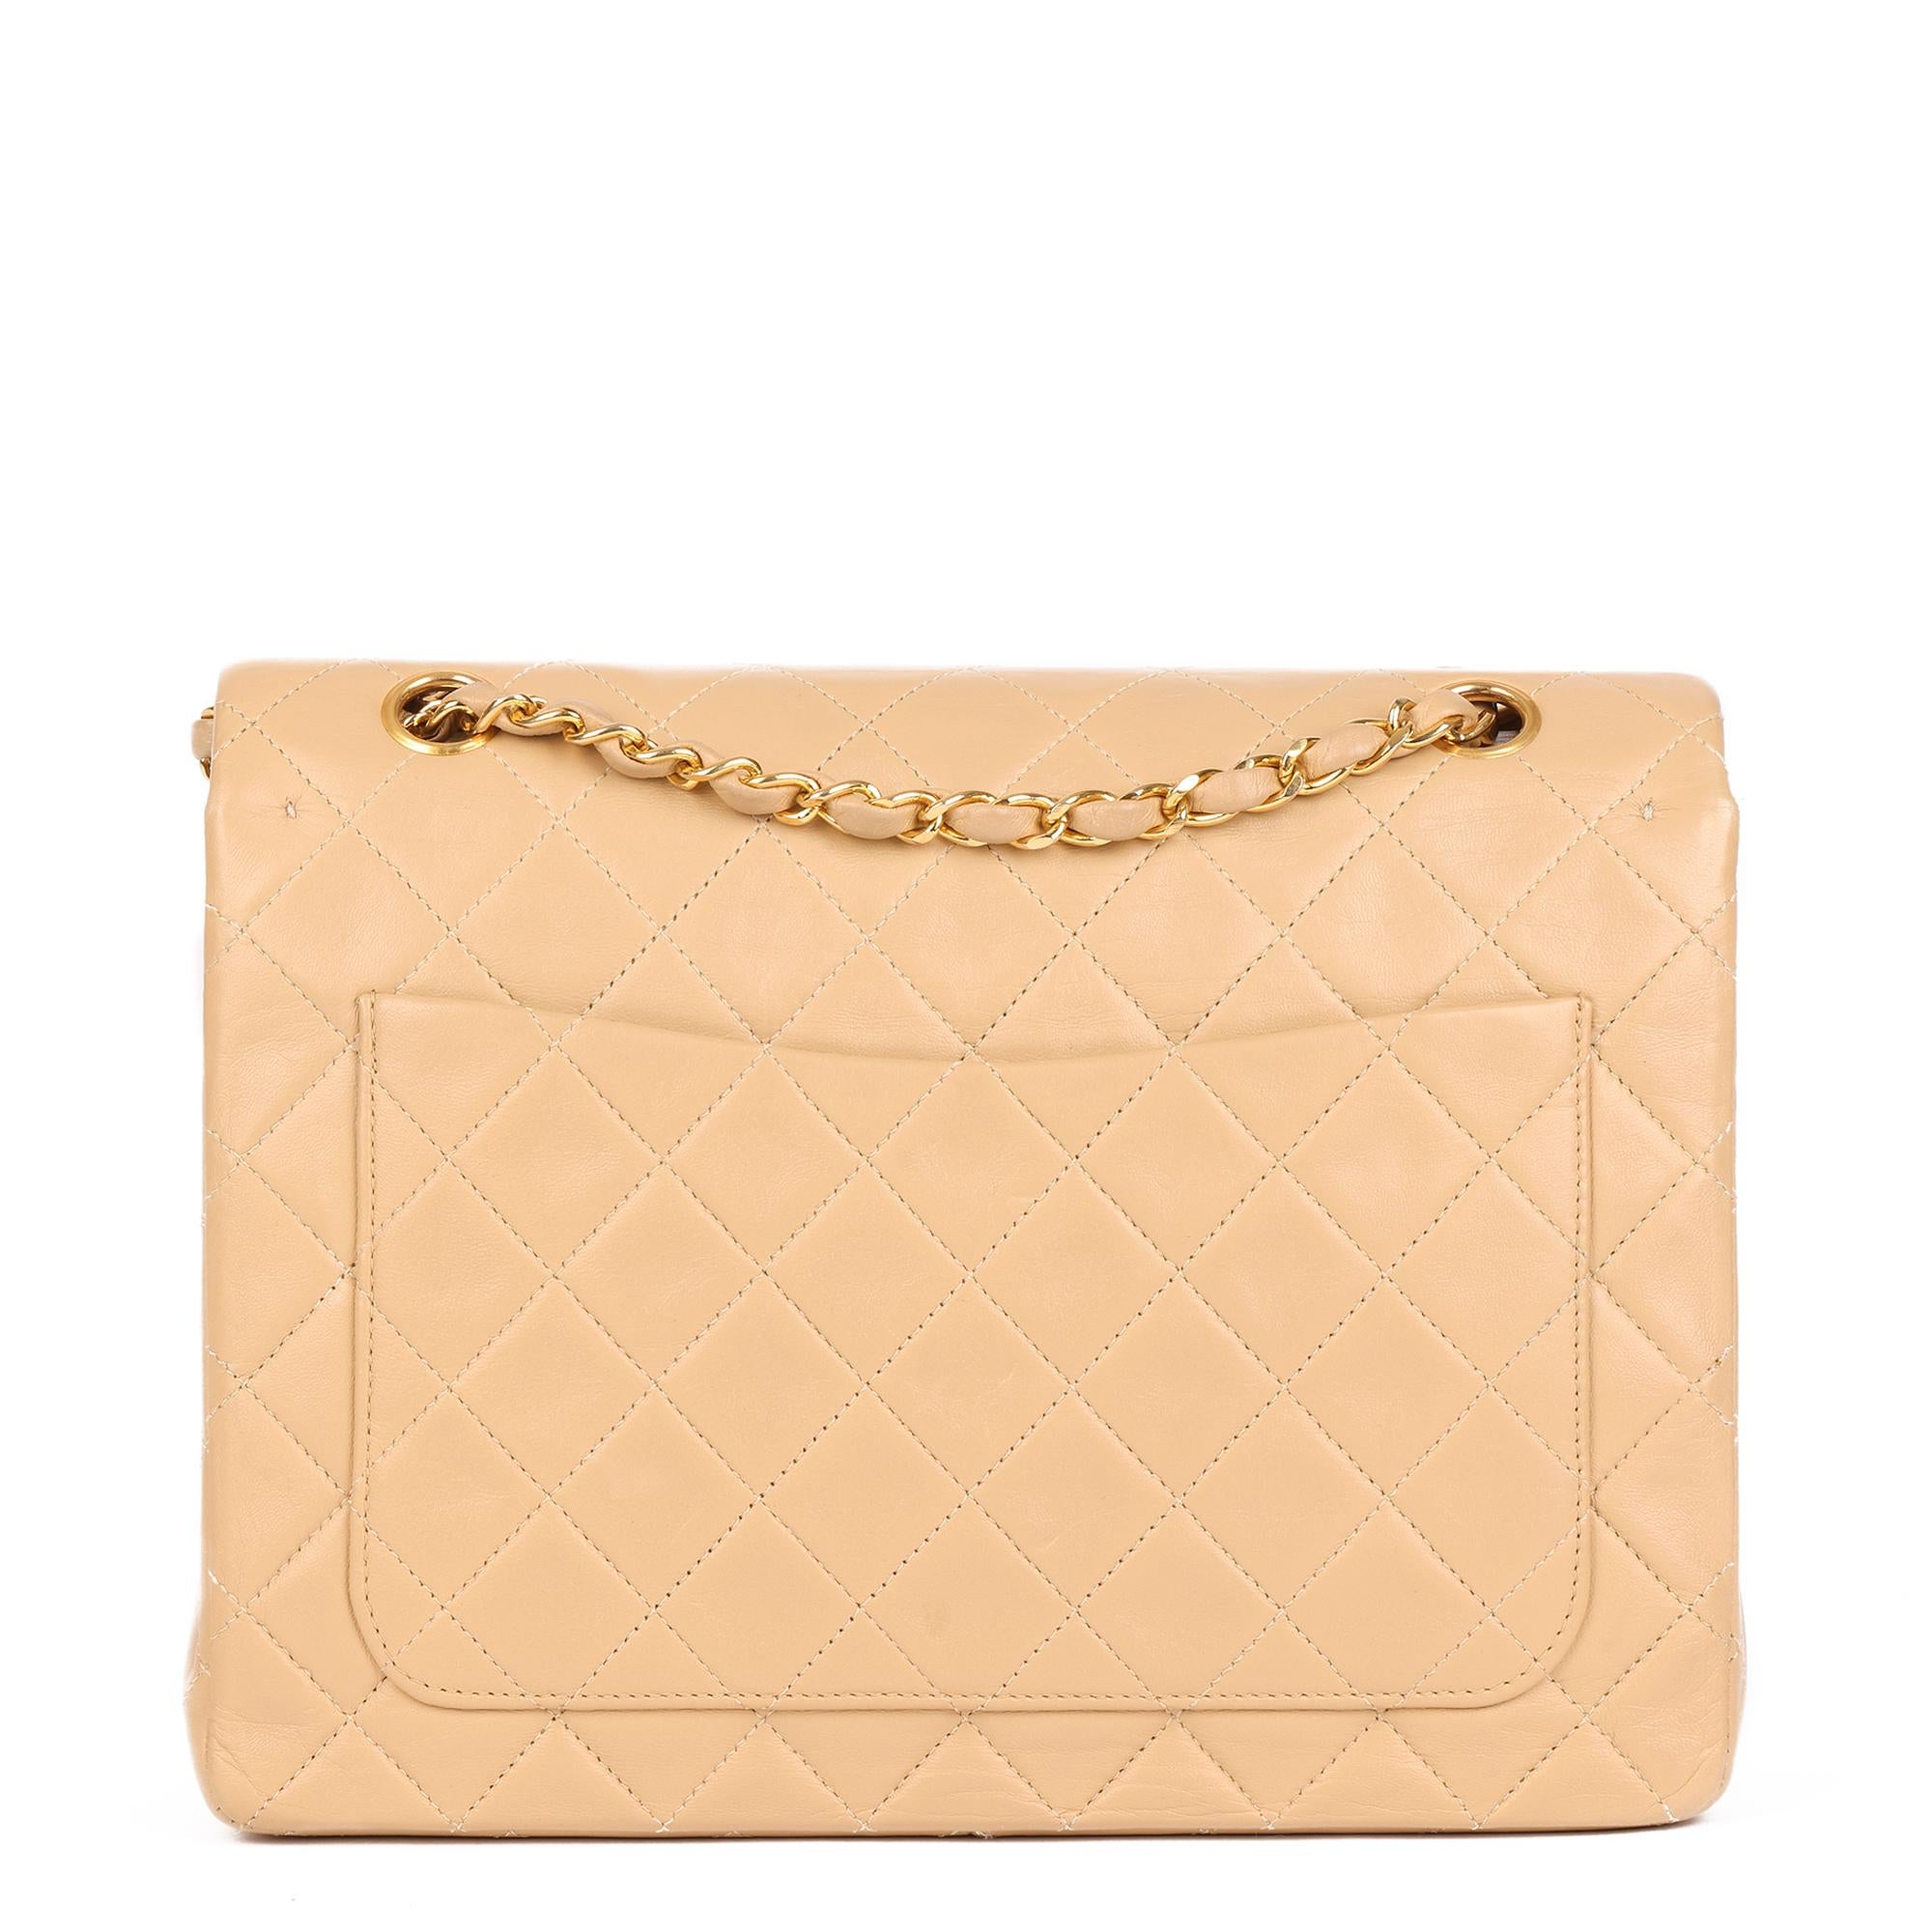 Chanel Beige Quilted Lambskin Vintage Medium Tall Classic Single Flap Bag 3